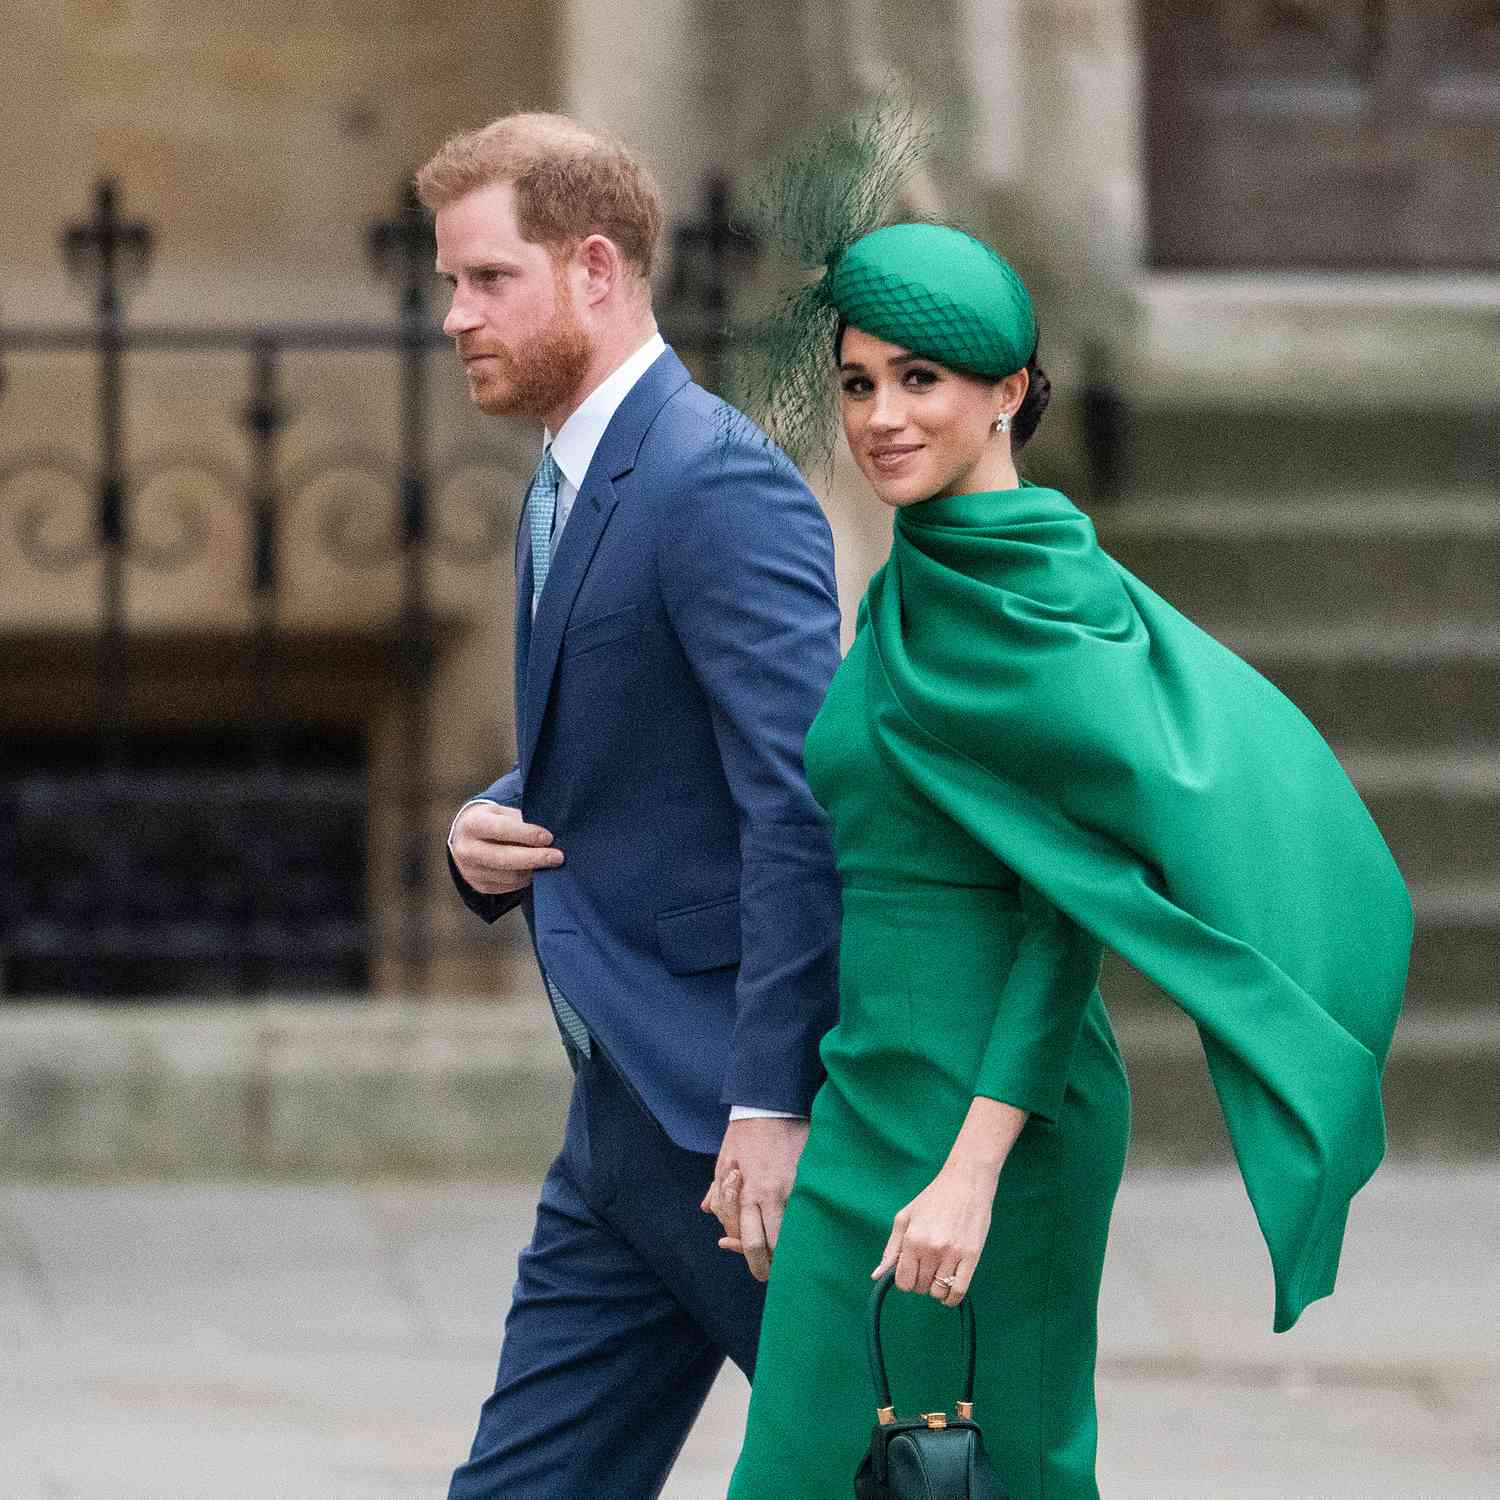 Hollywood celebrities reportedly avoiding Prince Harry and Meghan